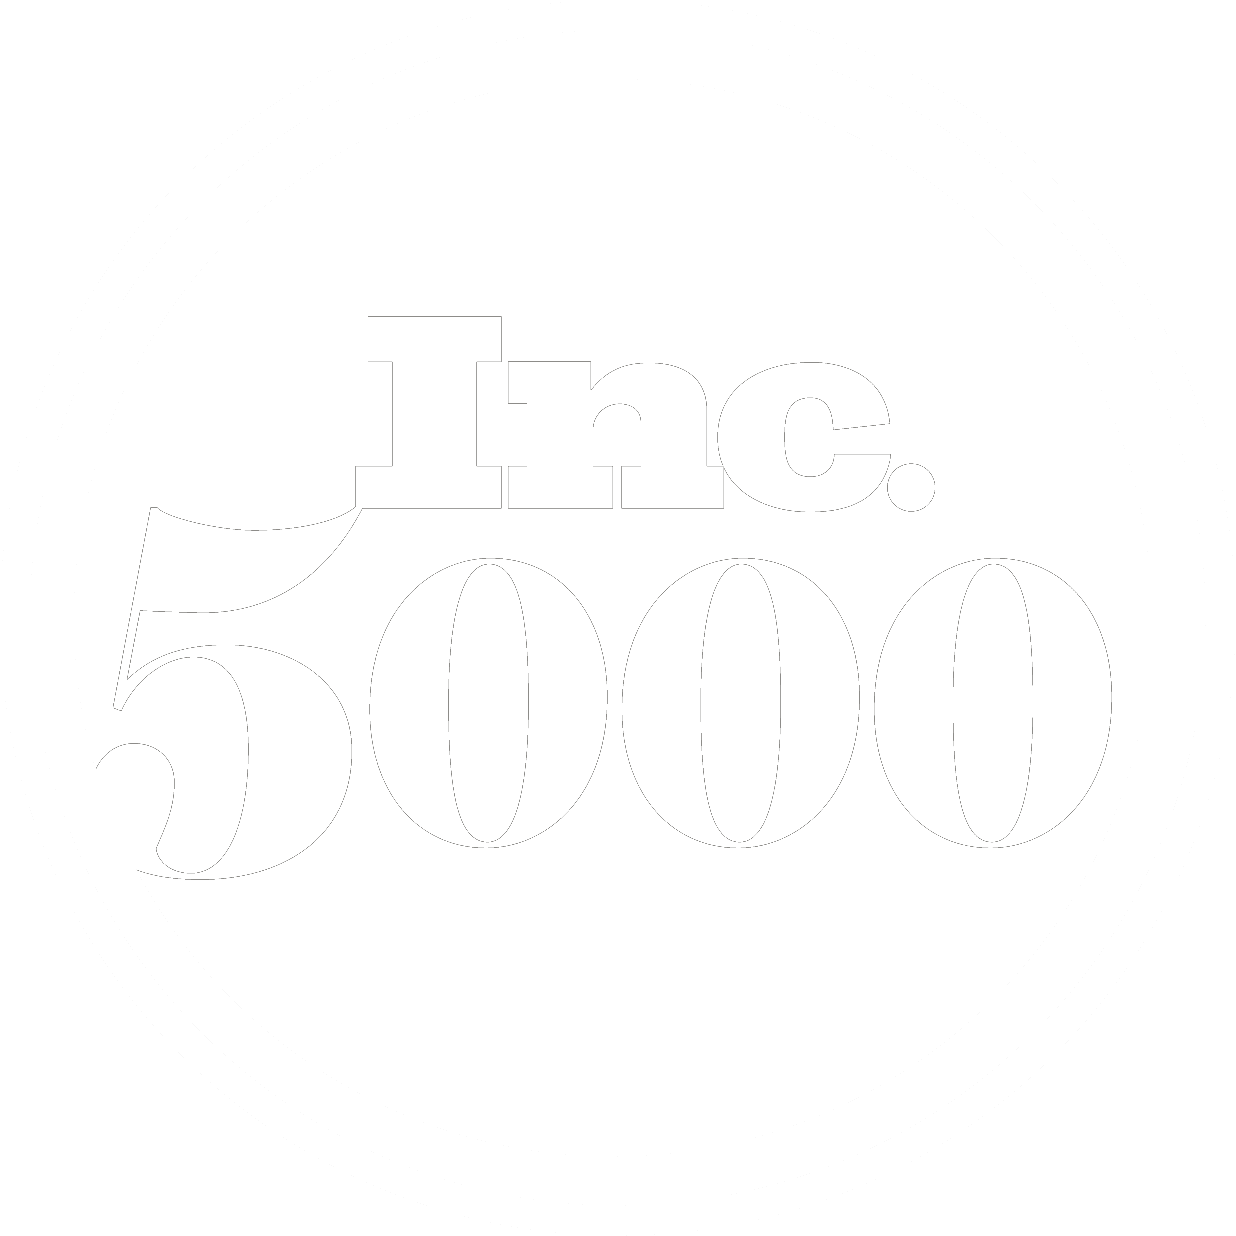 Carson Group Recognized on the  2022 Inc. 5000 List For the 5th Time